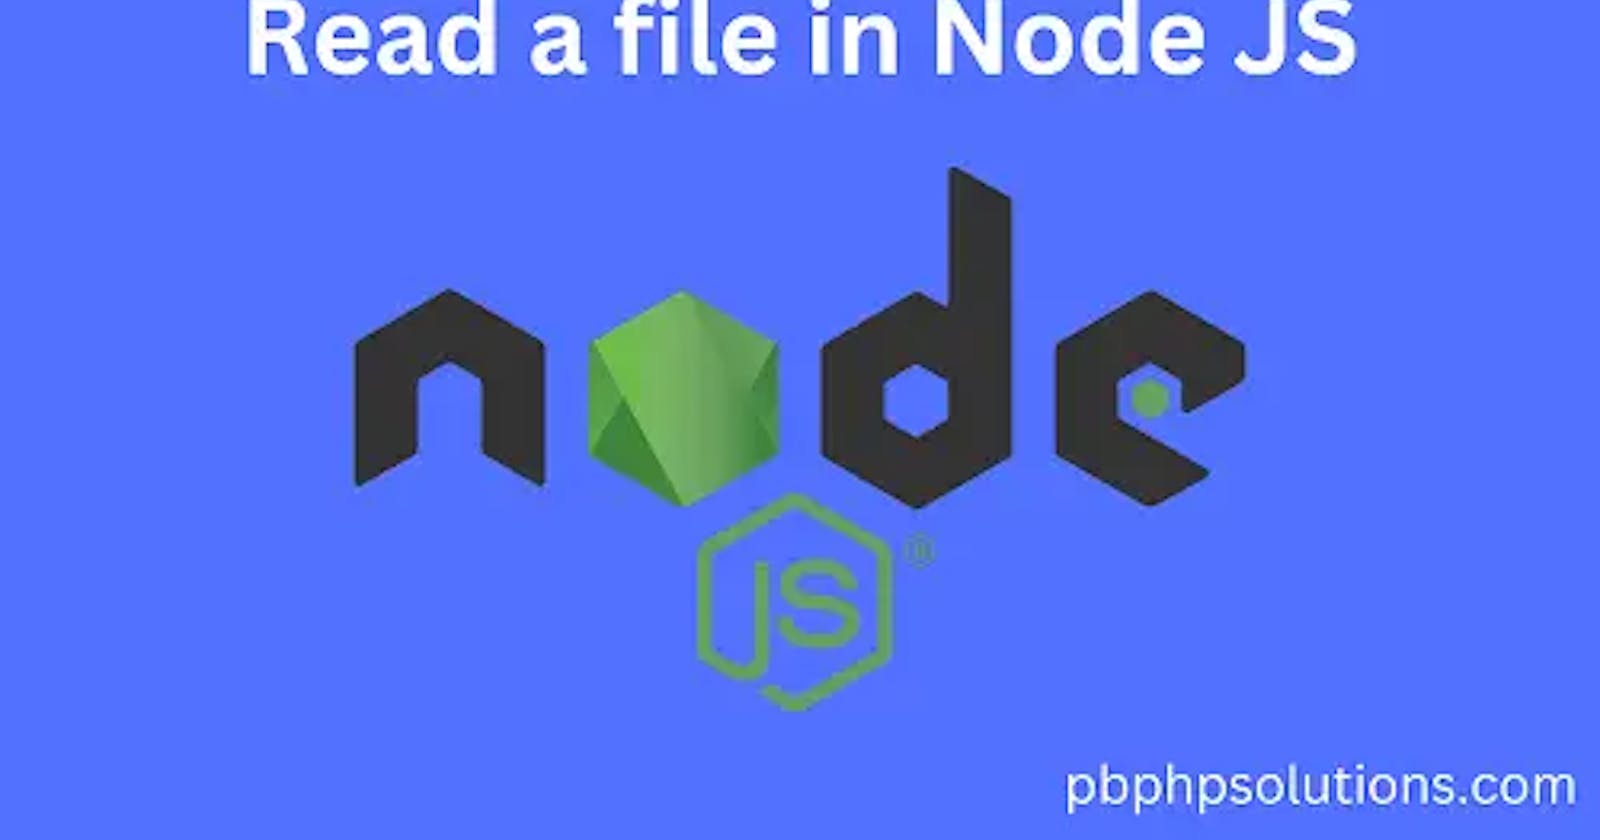 How To Read a file in Node JS